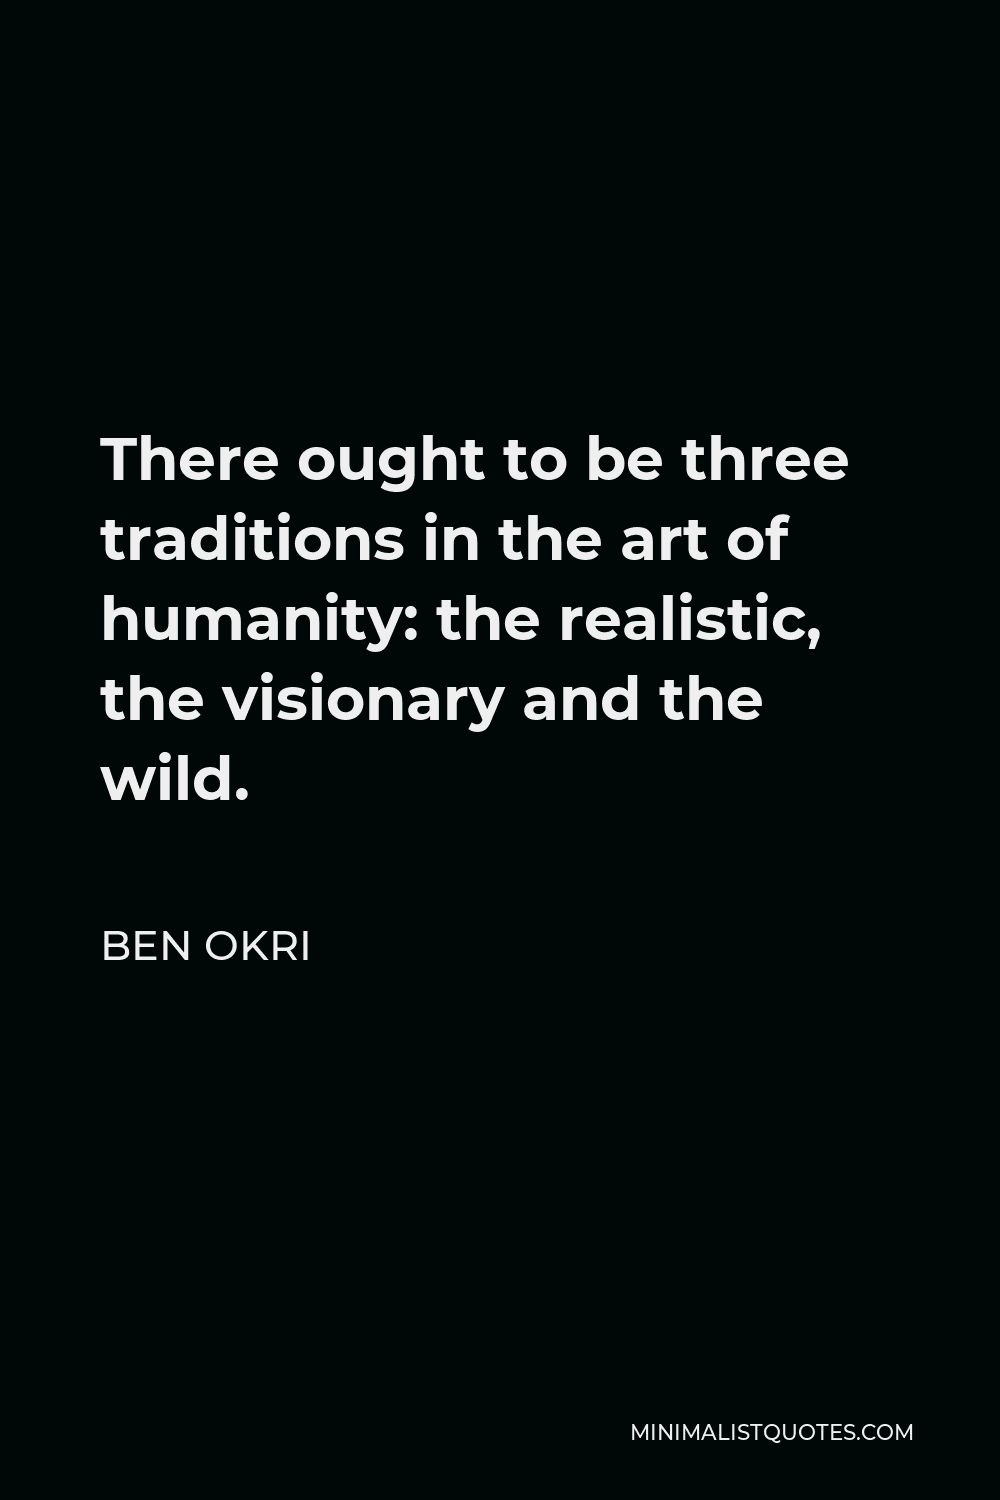 Ben Okri Quote - There ought to be three traditions in the art of humanity: the realistic, the visionary and the wild.